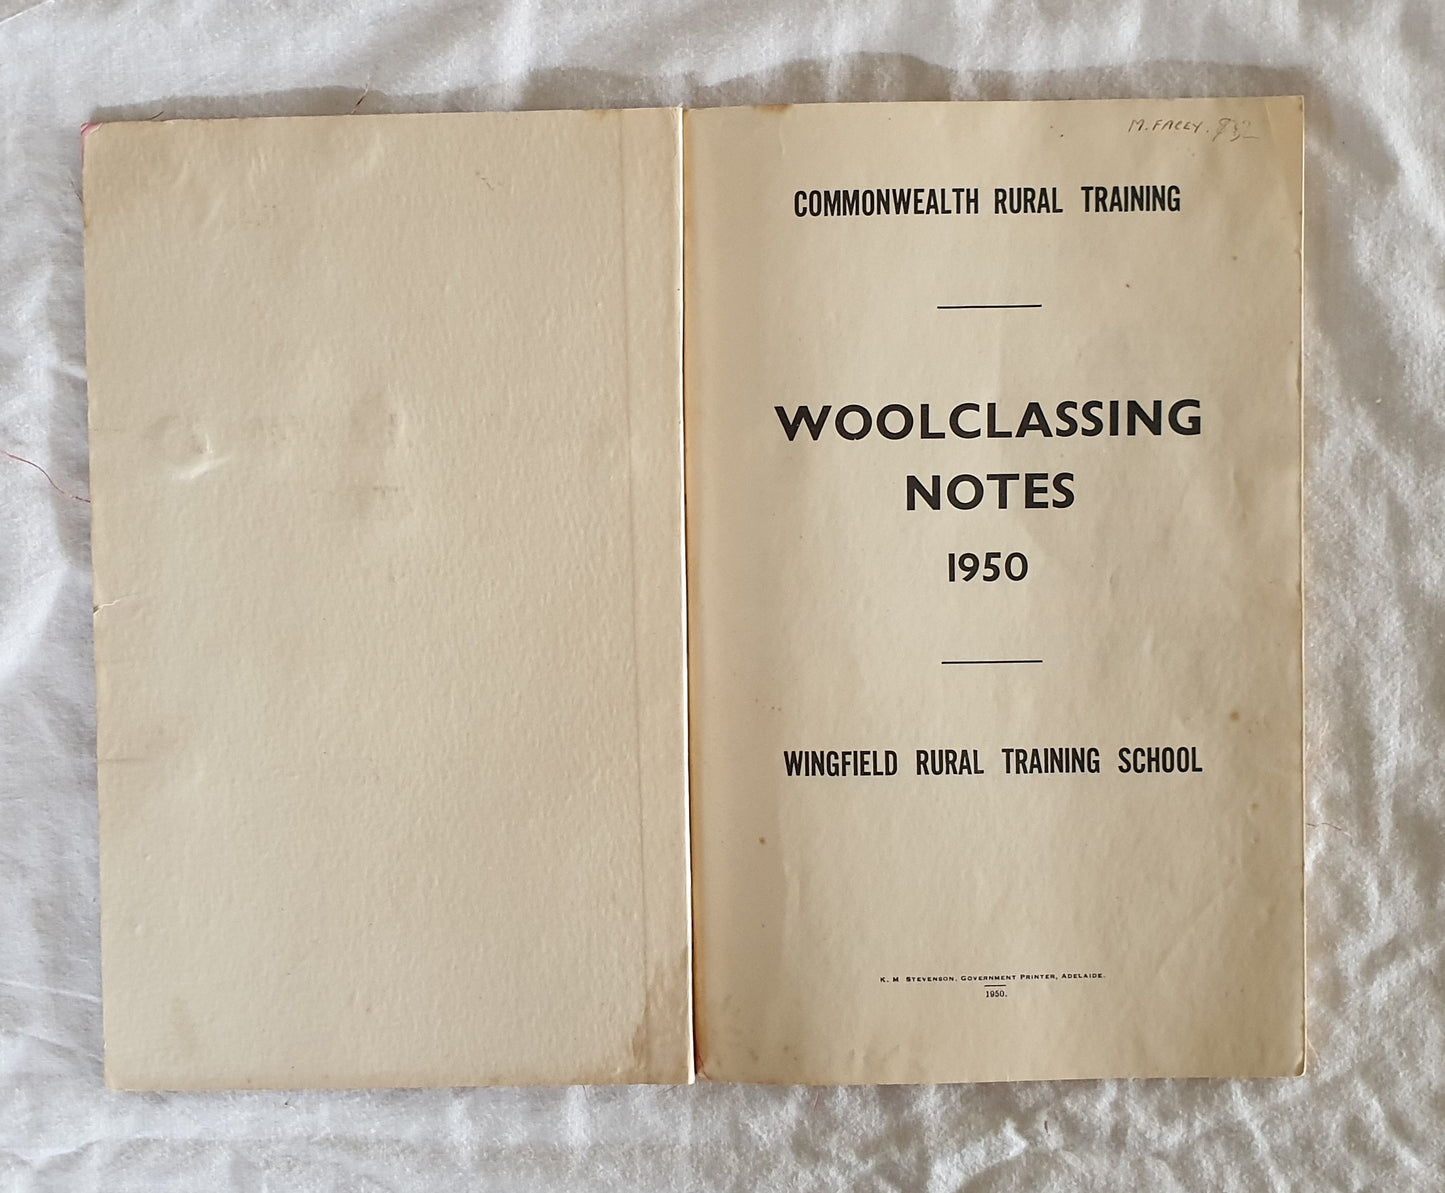 Woolclassing Notes 1950 by Wingfield Rural Training School